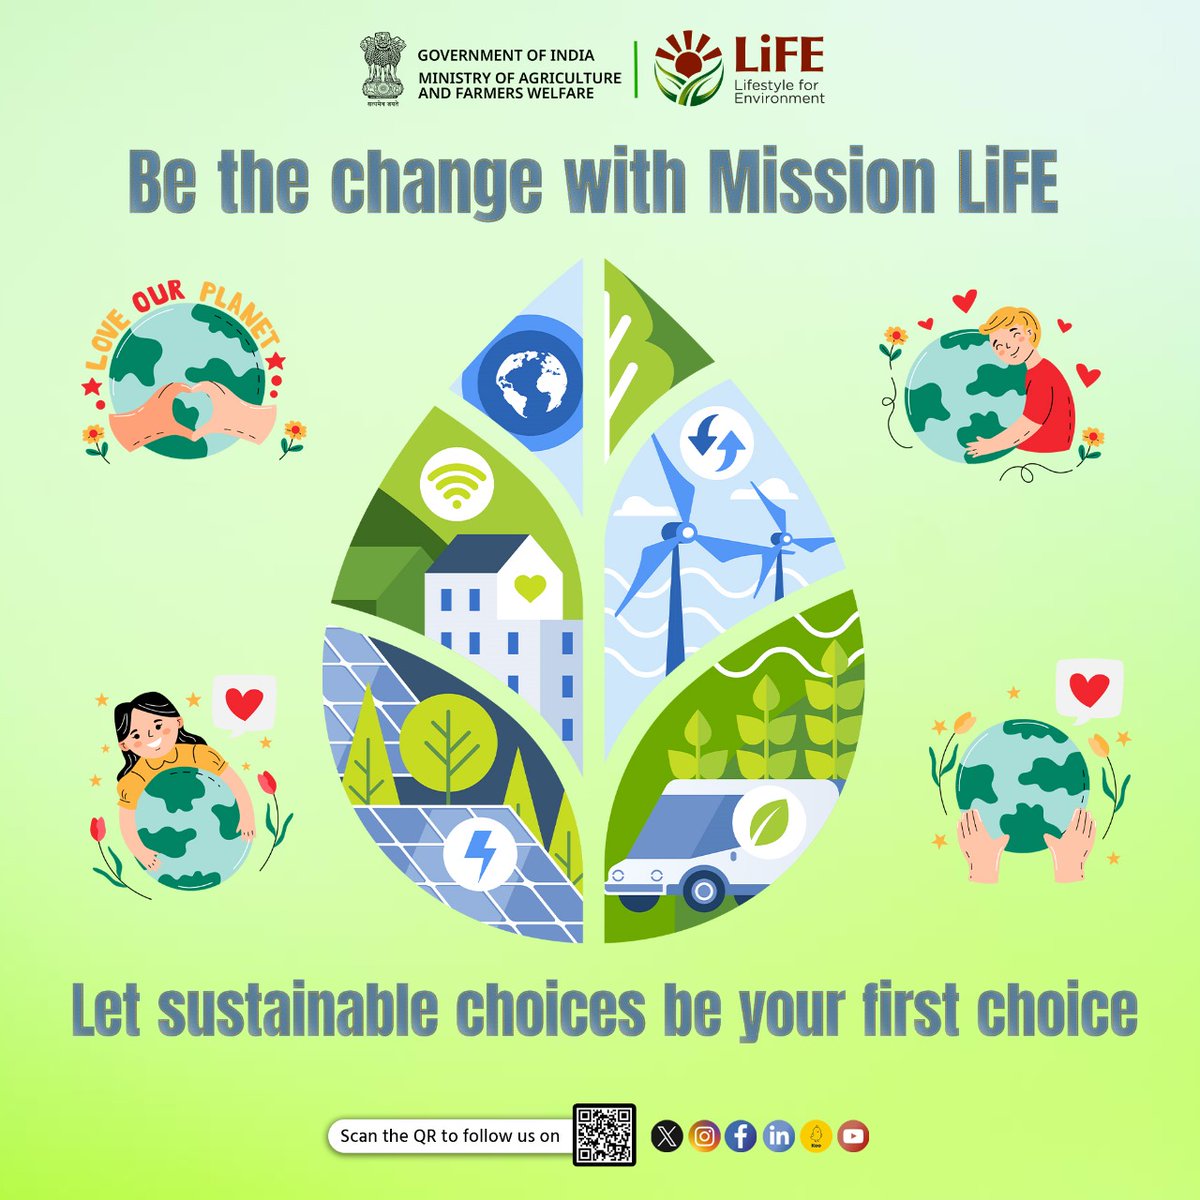 Opt for sustainable choices like reusable bags & eco-friendly products to reduce environmental impact by being the change with Mission LiFE.

#agrigoi #MissionLiFE #climateaction #sustainableliving #saveplanet #environment #climatechange